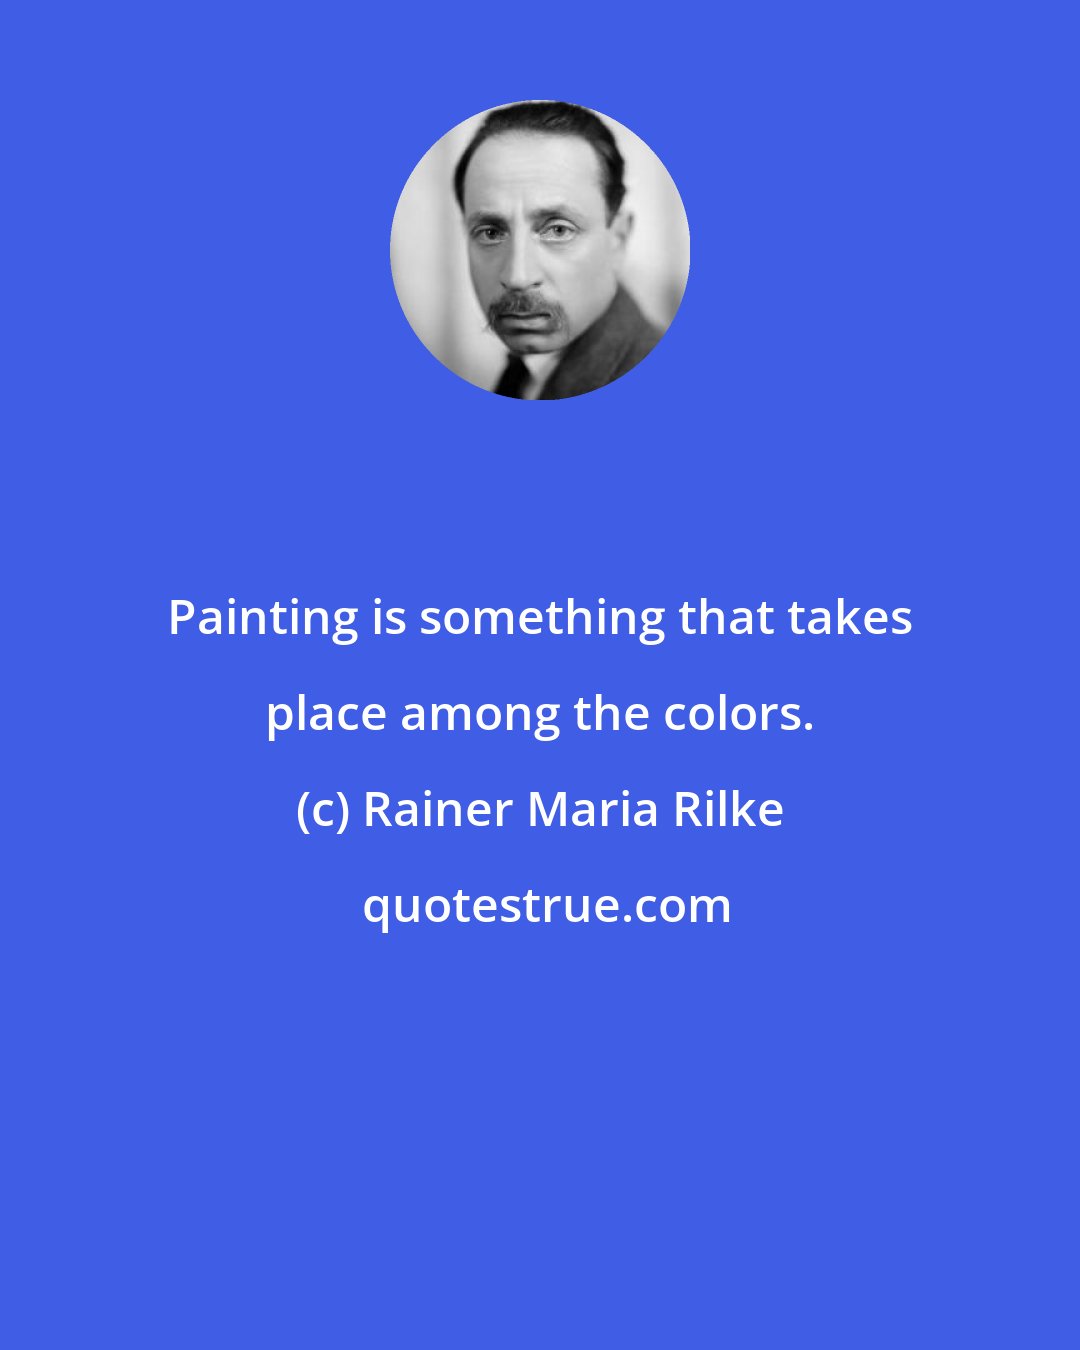 Rainer Maria Rilke: Painting is something that takes place among the colors.